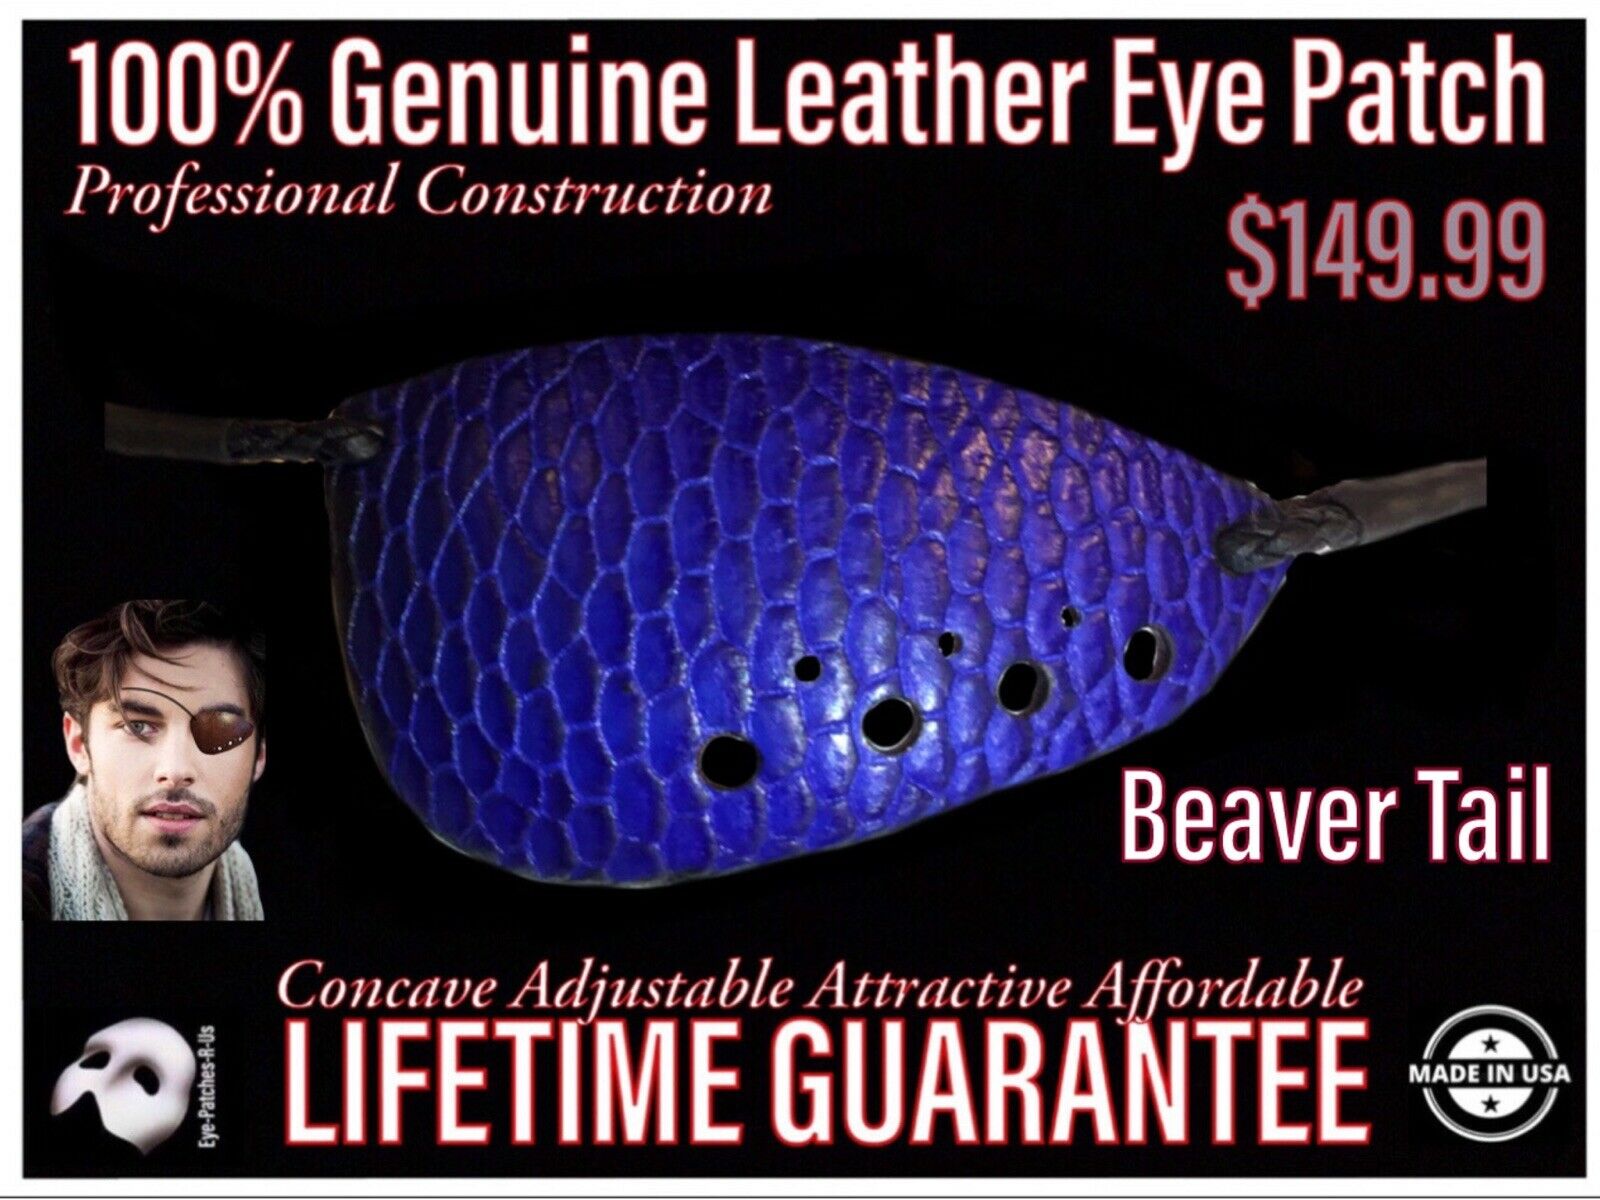 Lifetime Guarantee Blue Beaver Tail Leather Eye Patch @ Eye Patches R Us